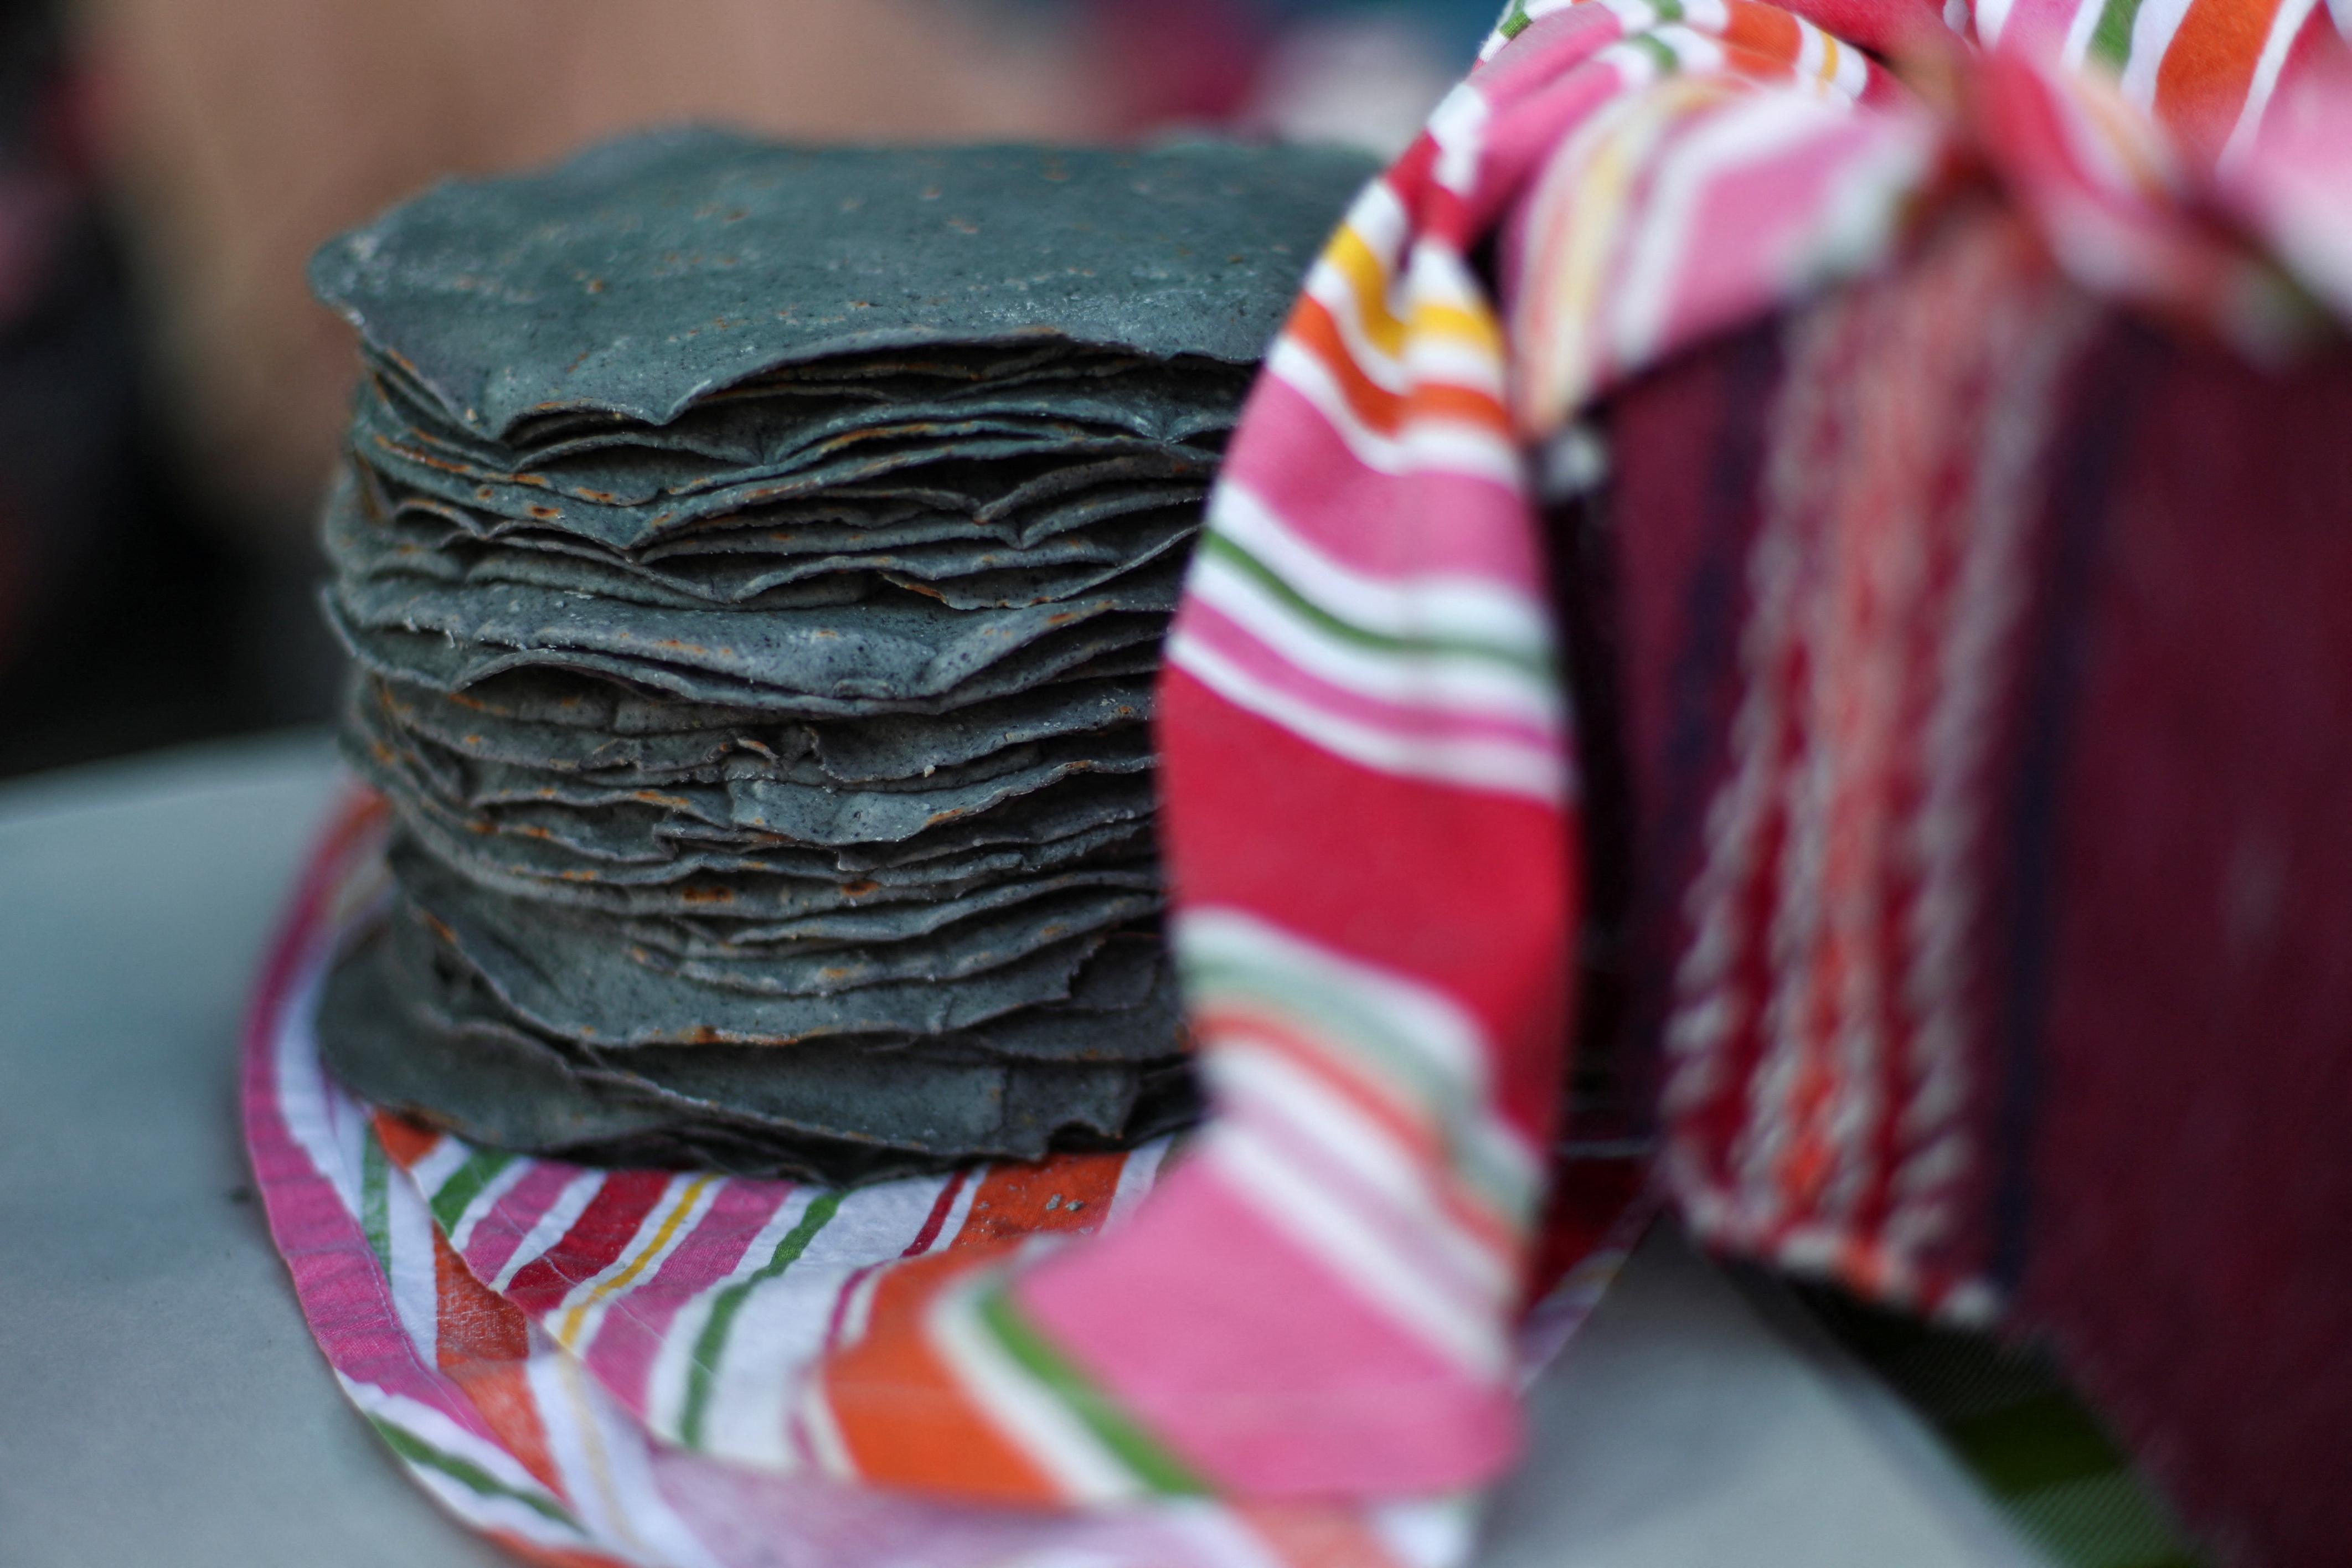 They detected “pirate” tortillas in Durango, Coahuila and Sinaloa: how to identify them